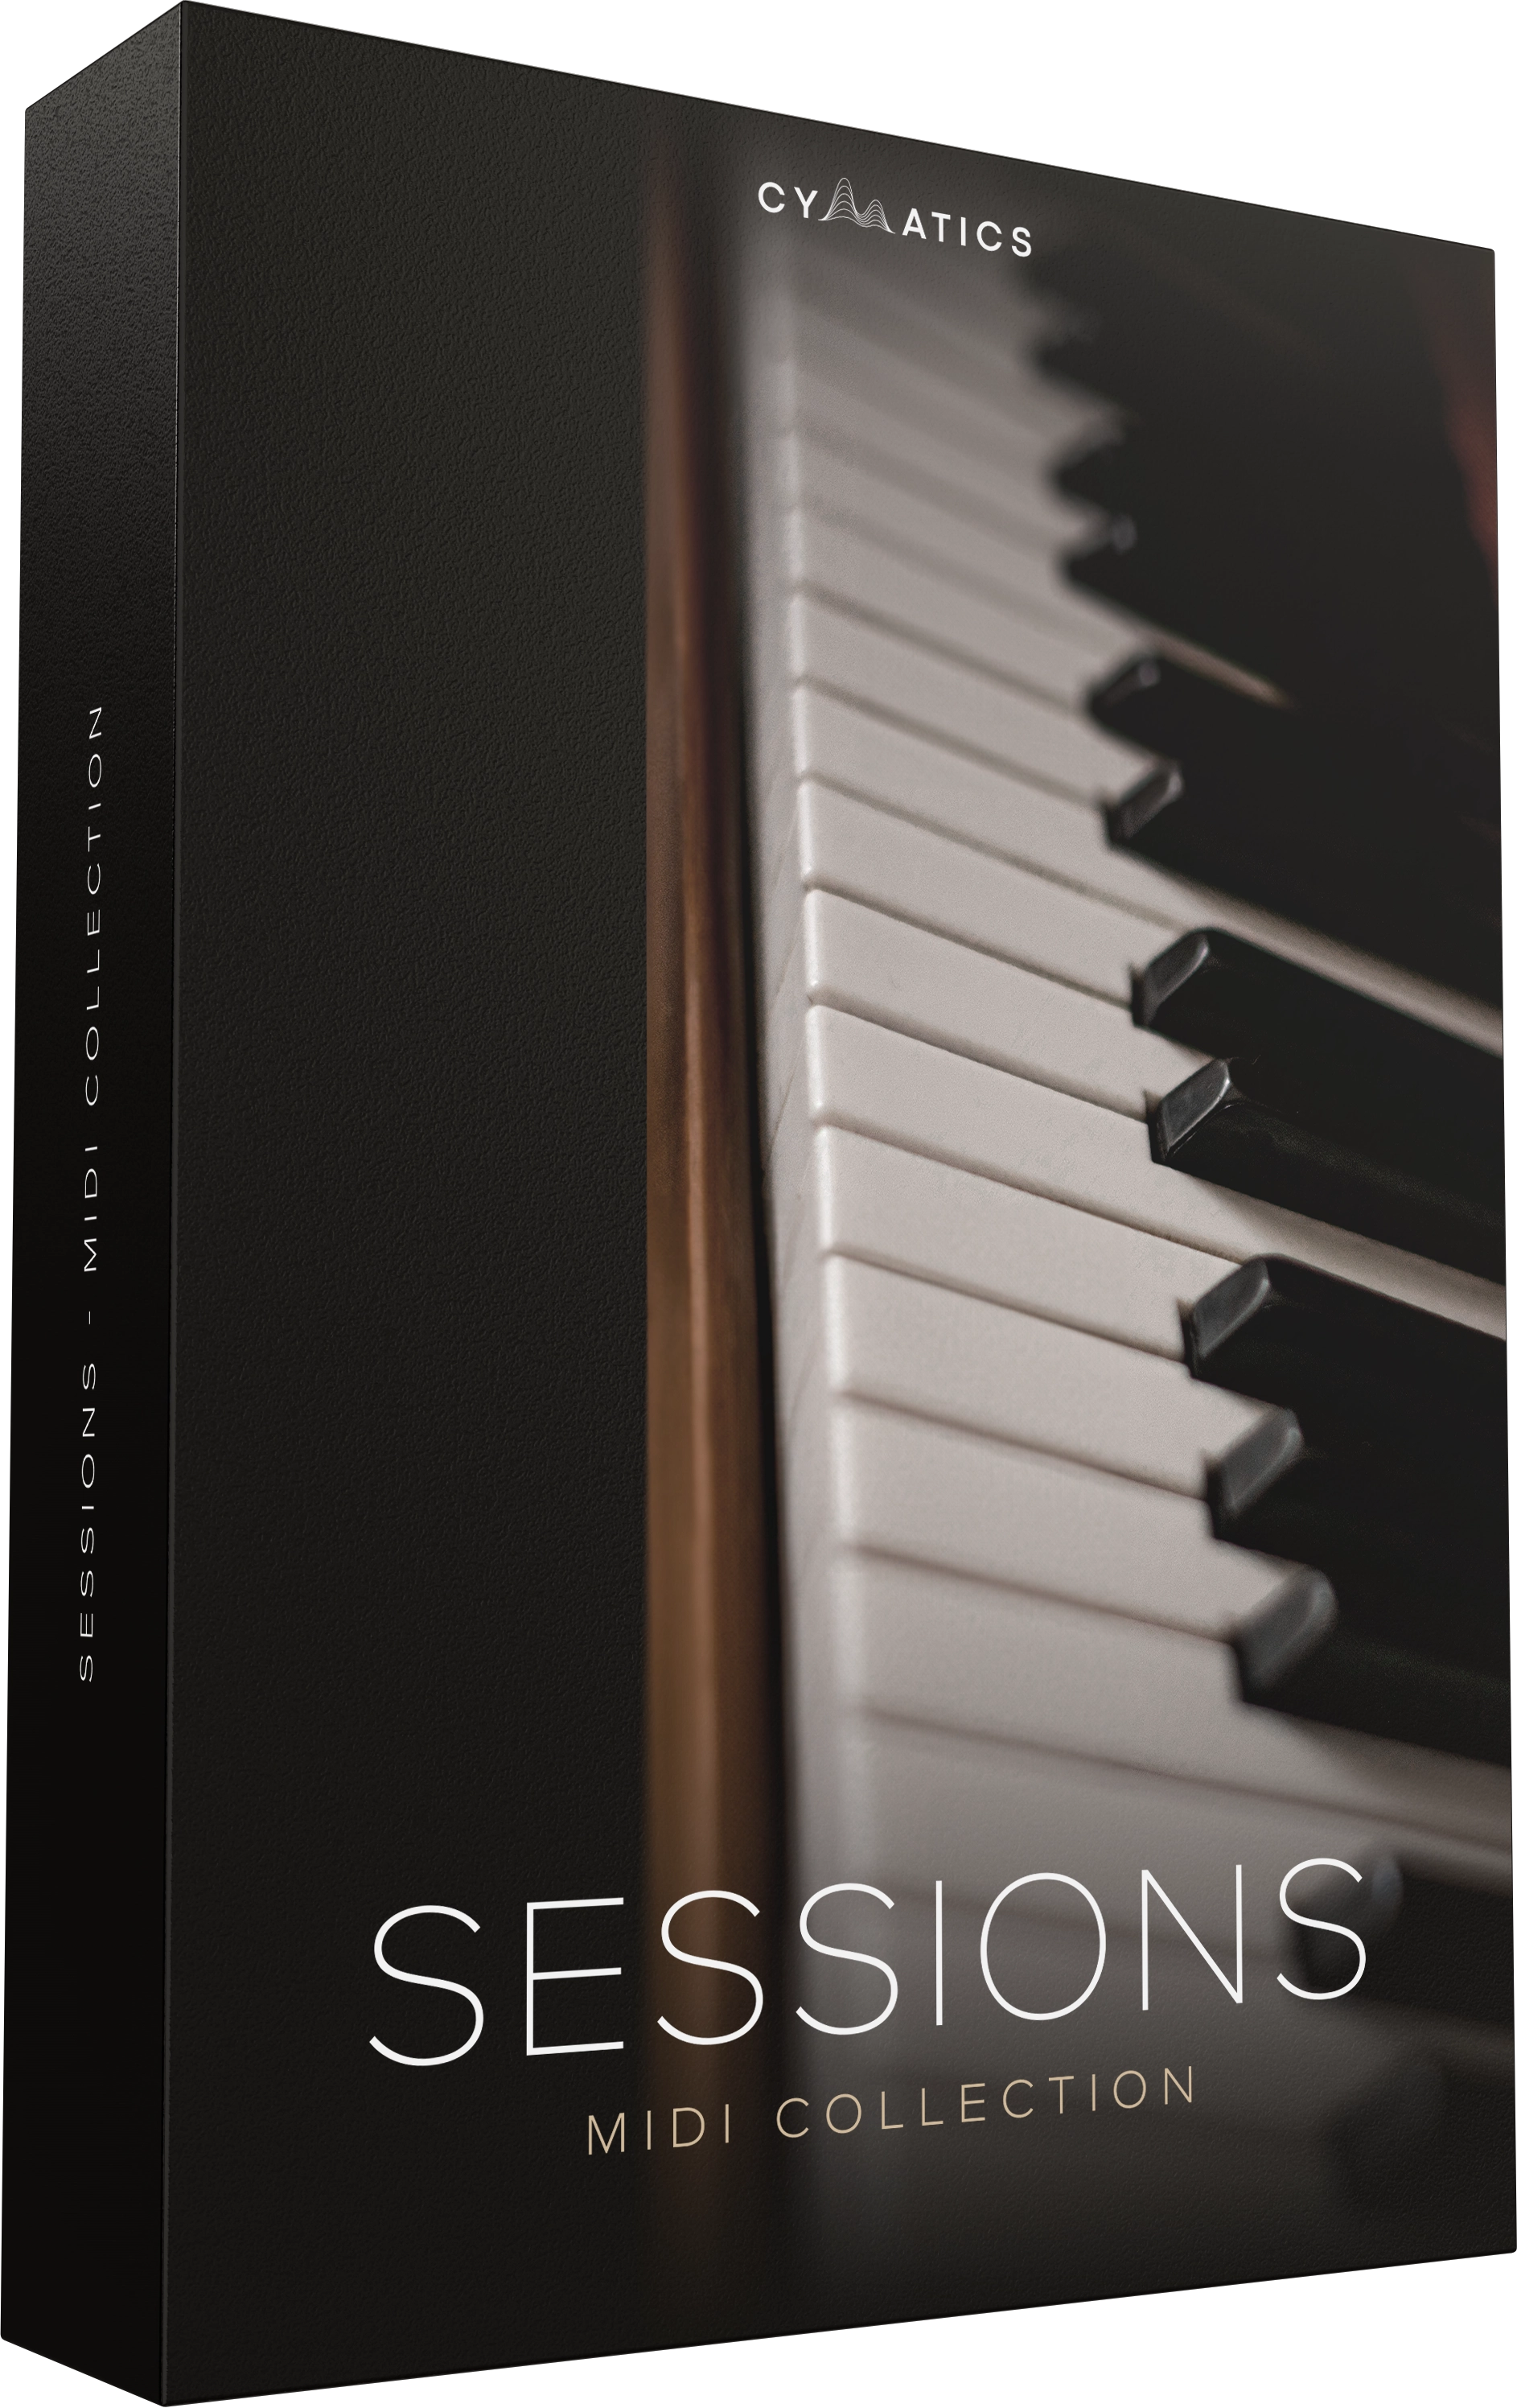 SESSIONS: MIDI Collection